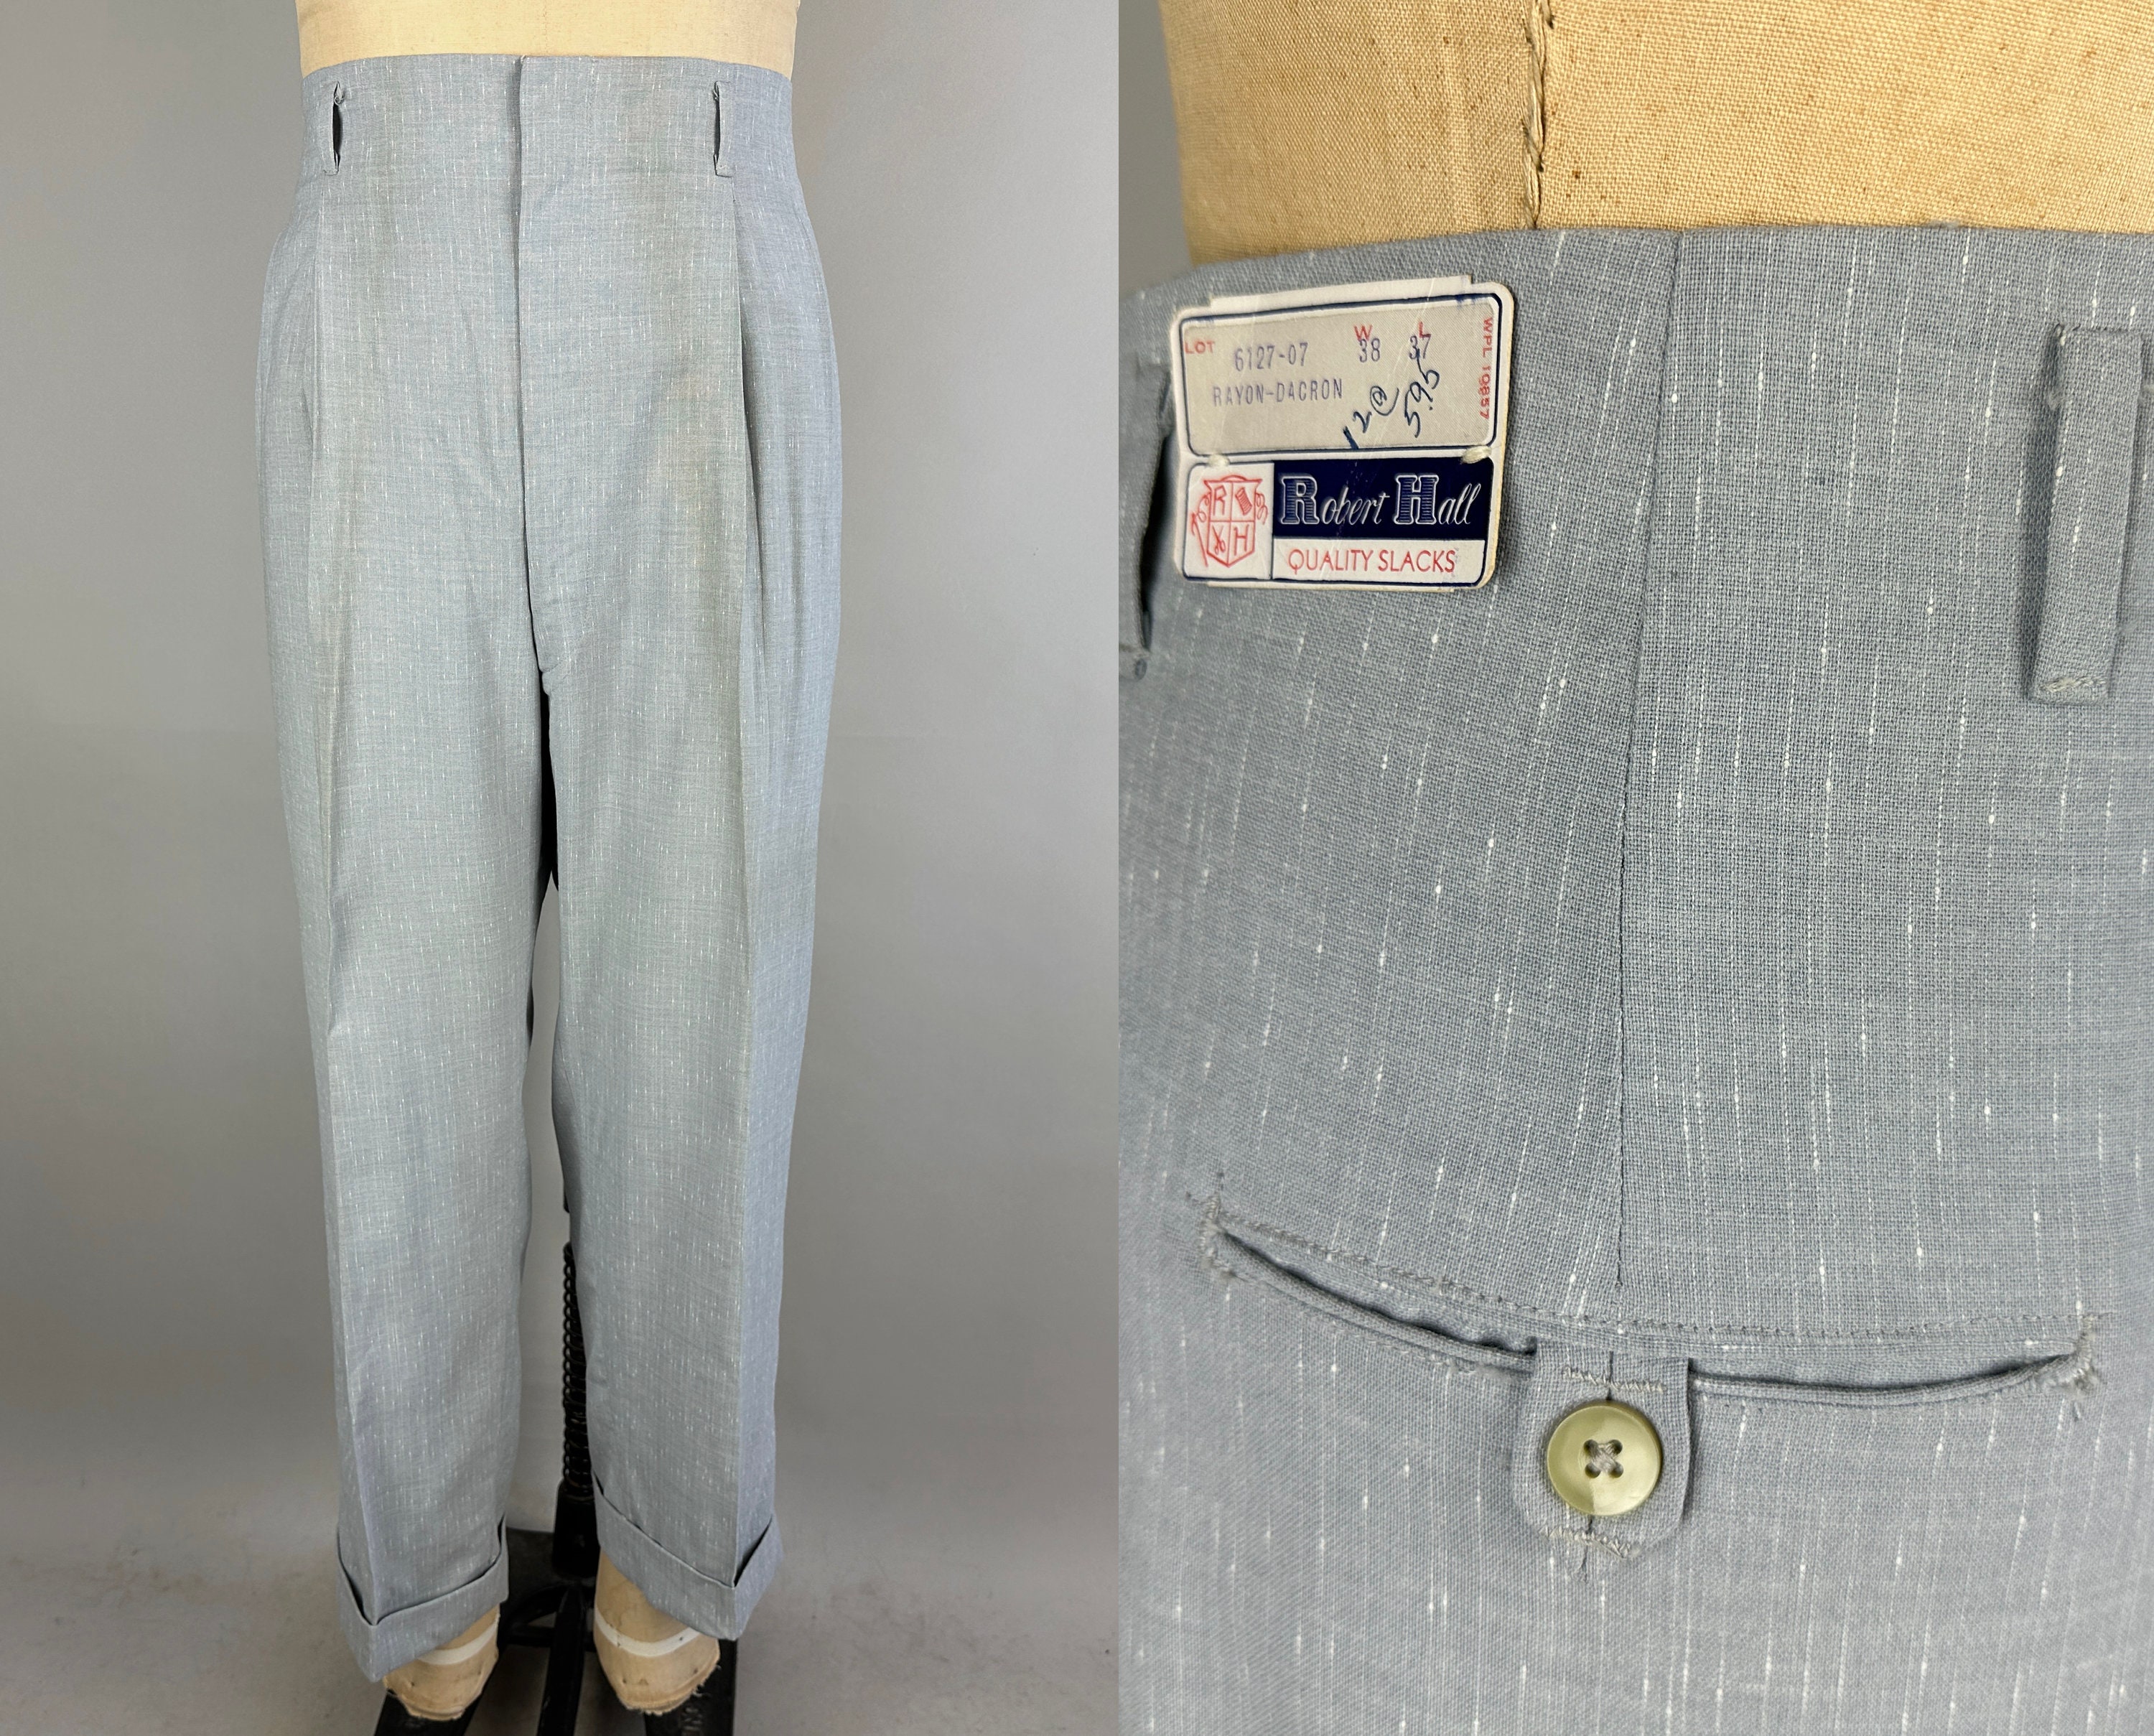 1950s Leading Man Trousers Vintage 50s NWT Deadstock Pleated Pants Slacks  in White Flecked Grey W/hollywood Waist 38x264 Extra Large XL 